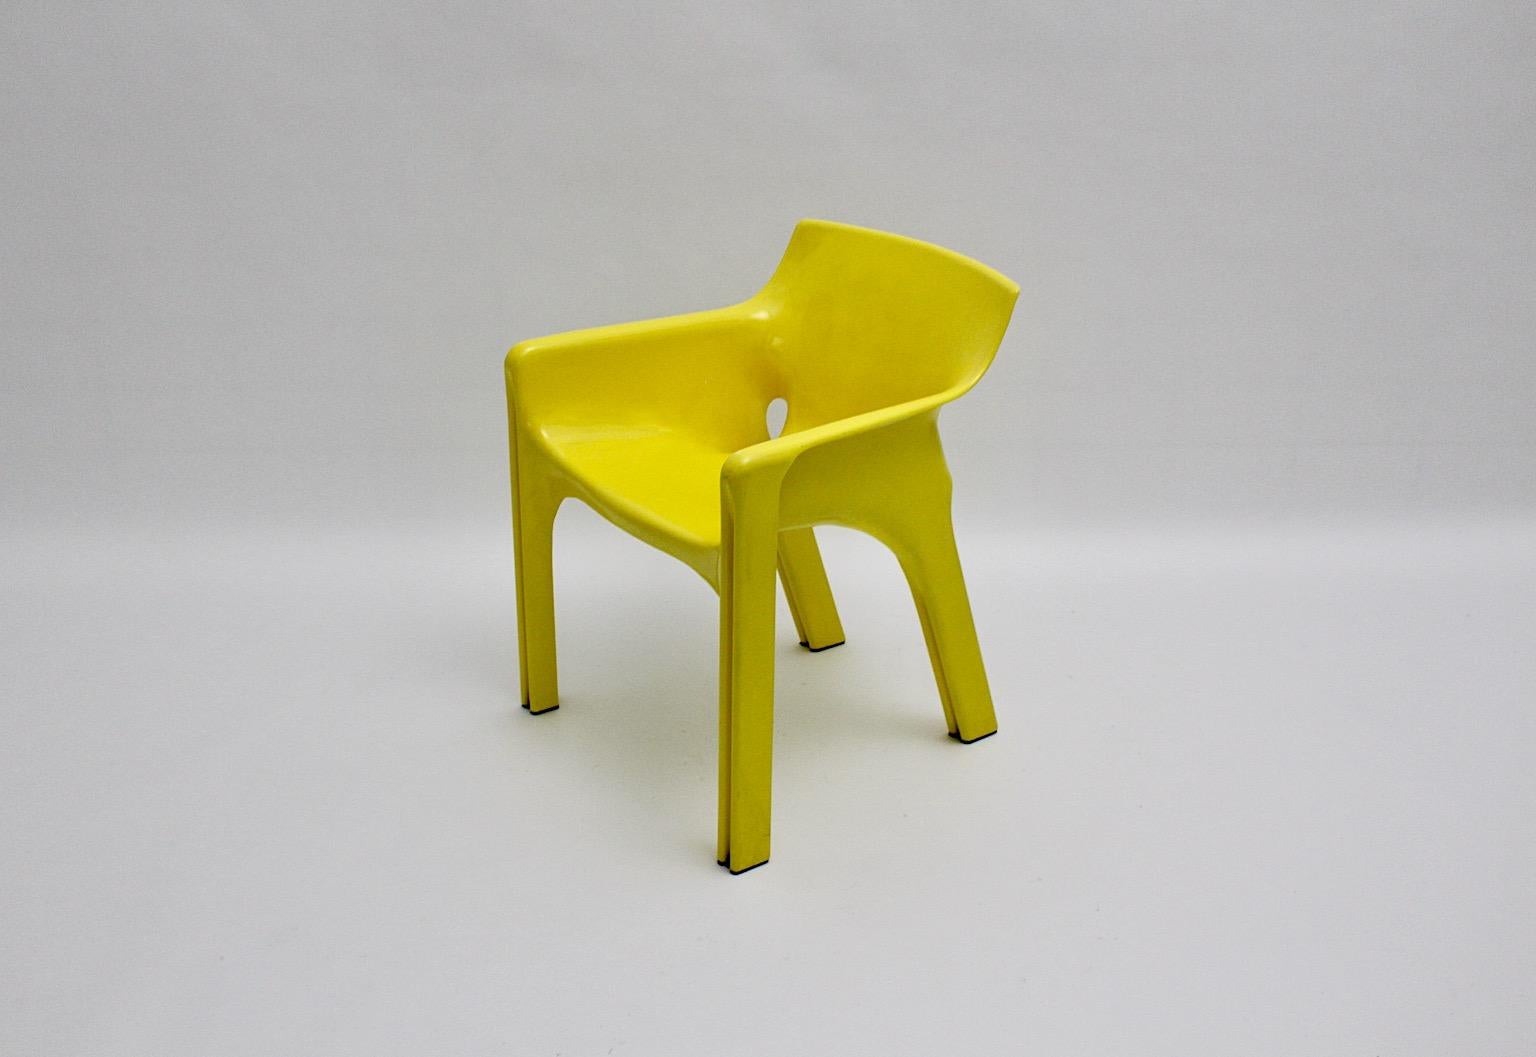 Space Age Vintage Yellow Plastic Armchair Gaudi by Vico Magistretti 1968 Italy For Sale 2